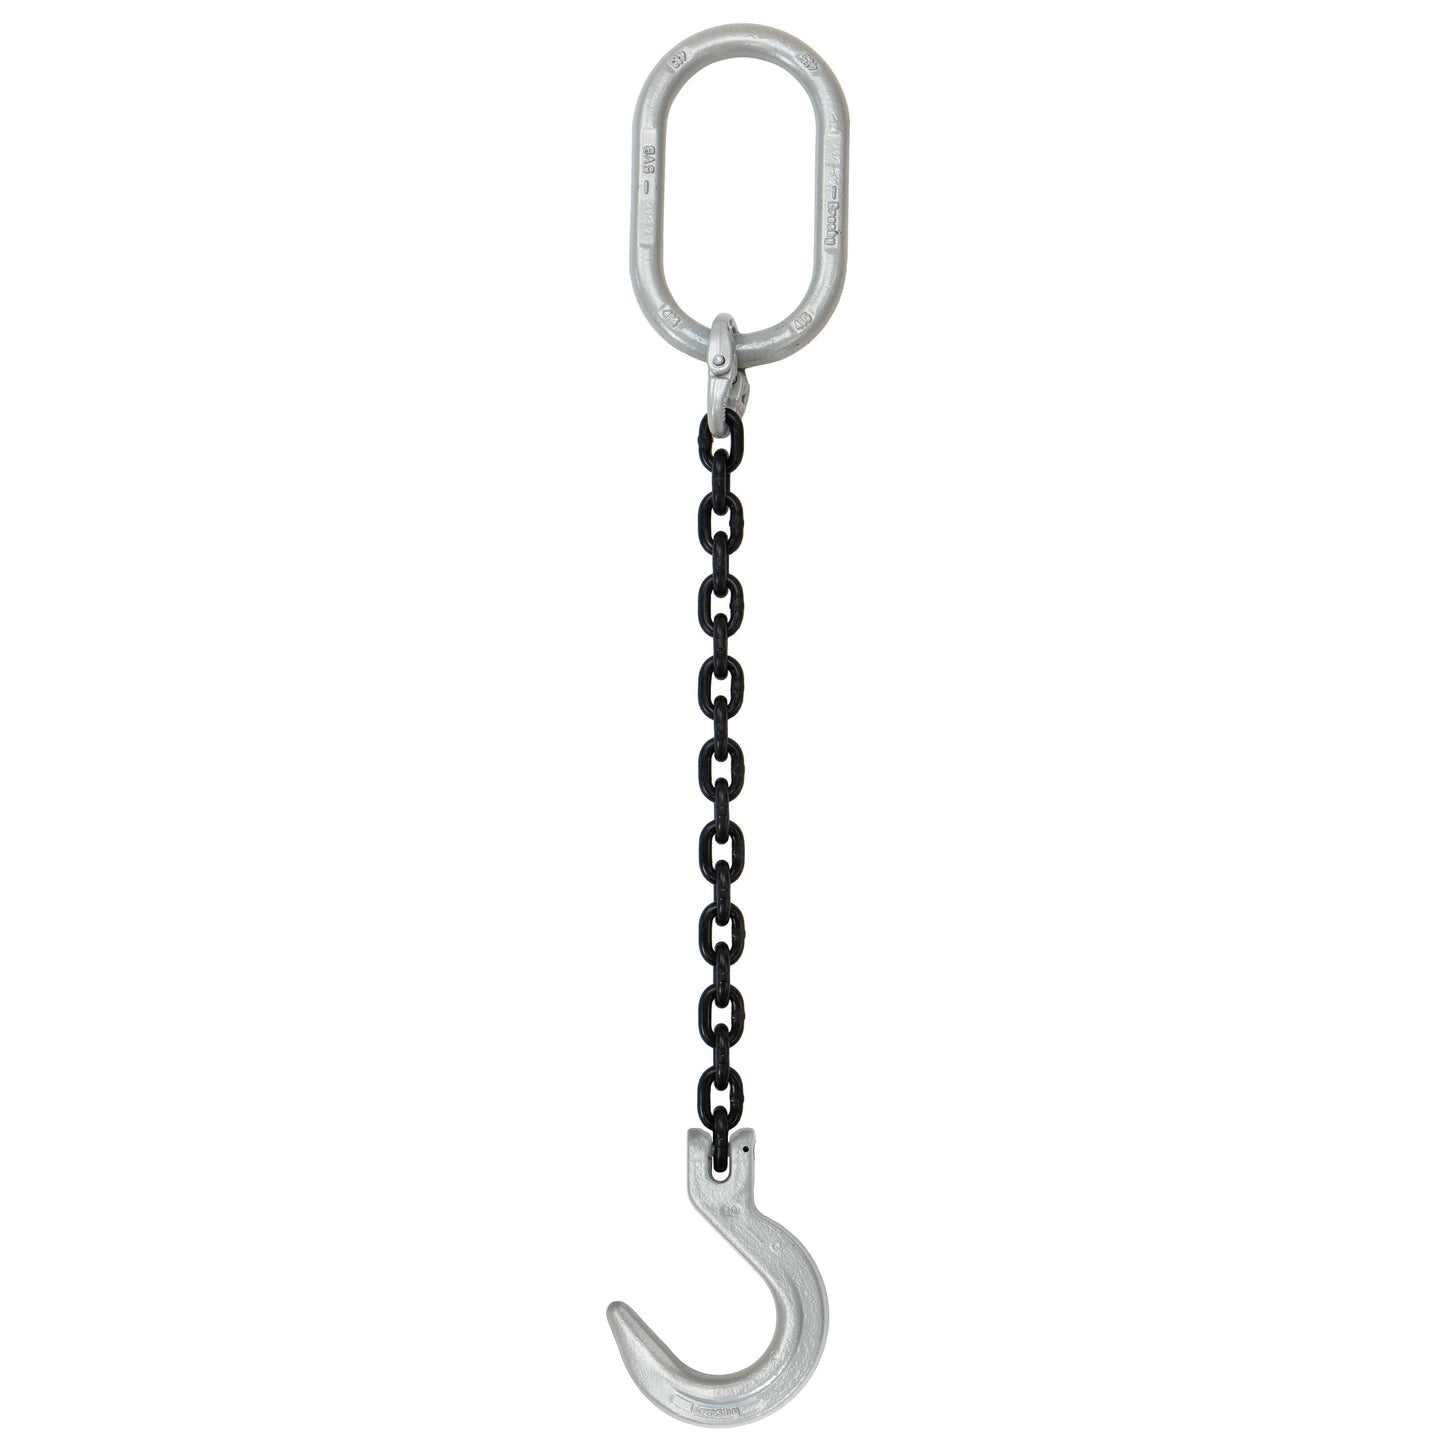 12 inch x 8 foot Domestic Single Leg Chain Sling w Crosby Foundry Hook Grade 100 image 1 of 2